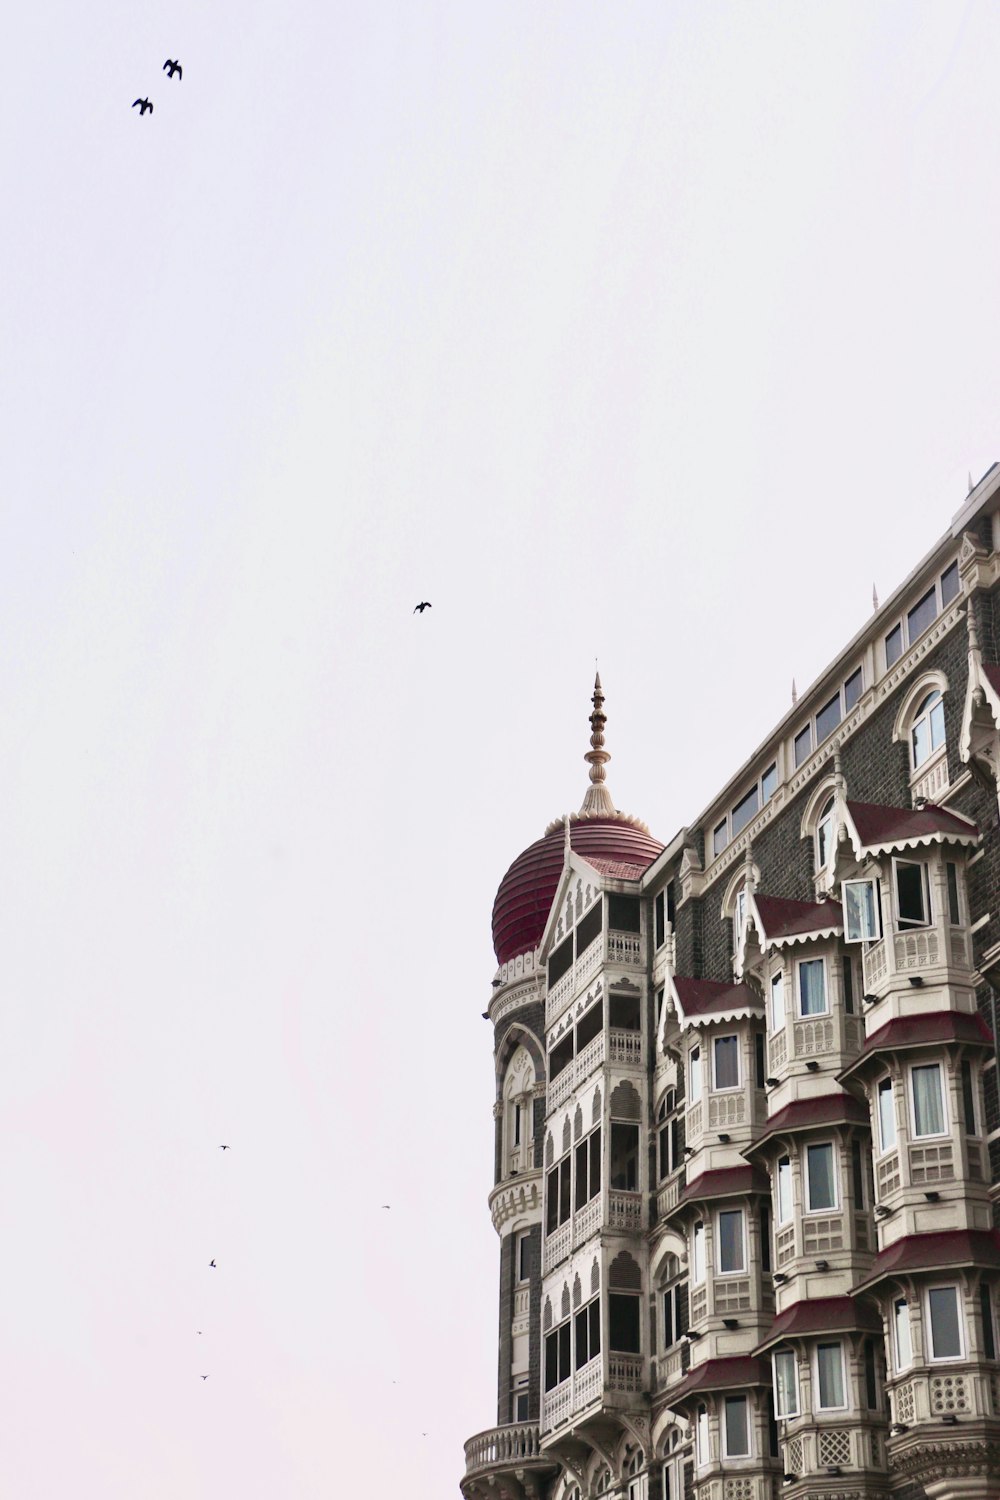 birds flying over a row of buildings